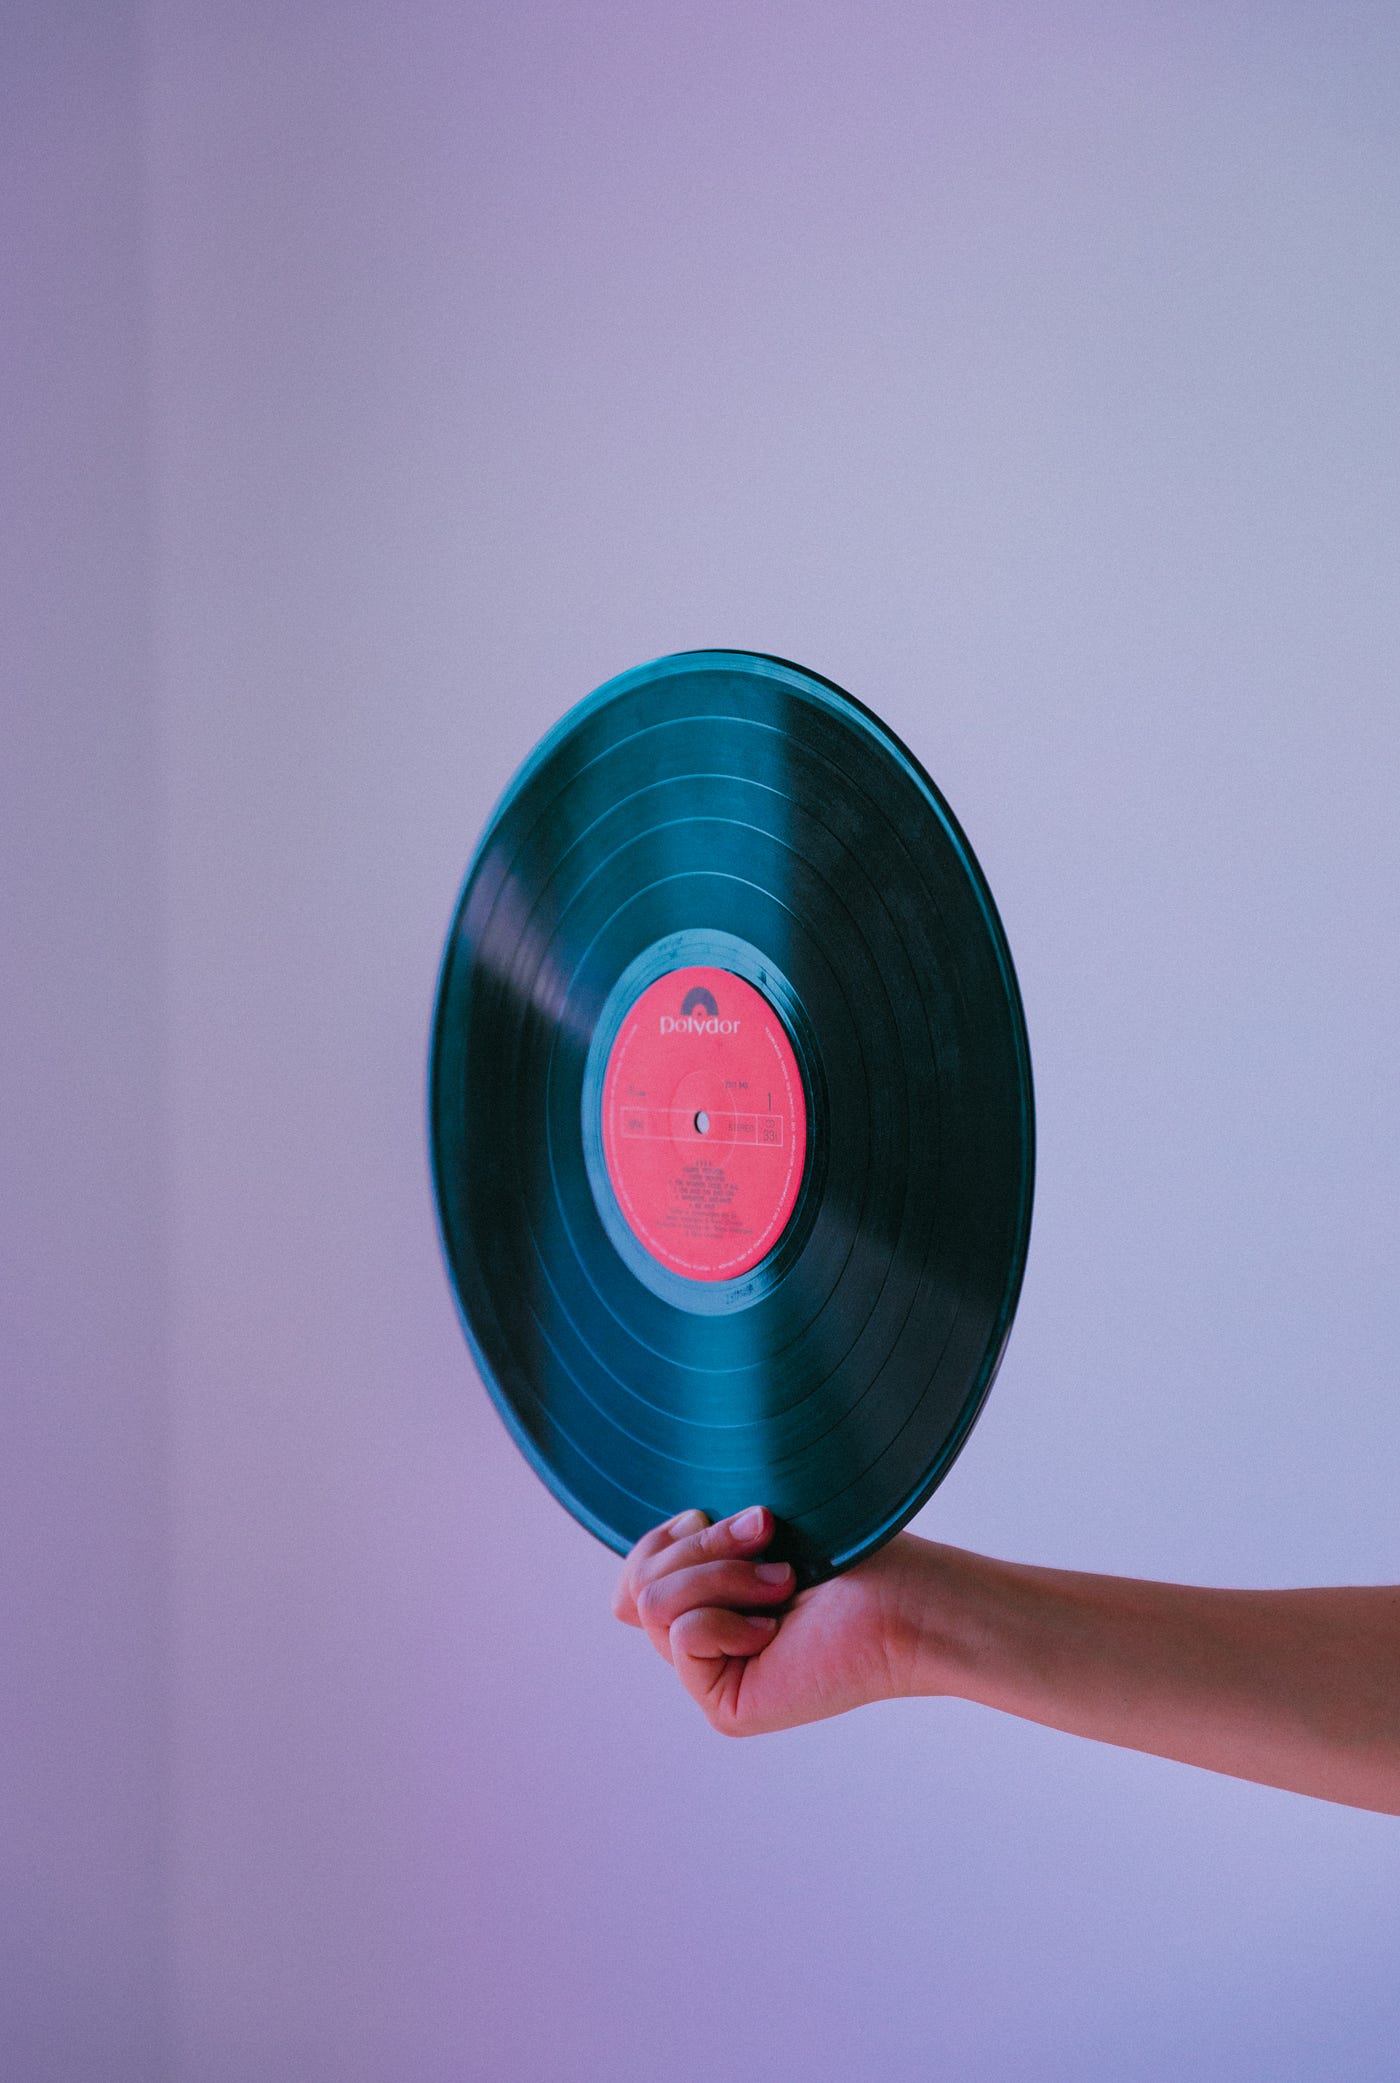 A hand extends from the right to hold an old-fashioned vinyl record (with a red center). Heart dynamics influence our momentary experience of time.